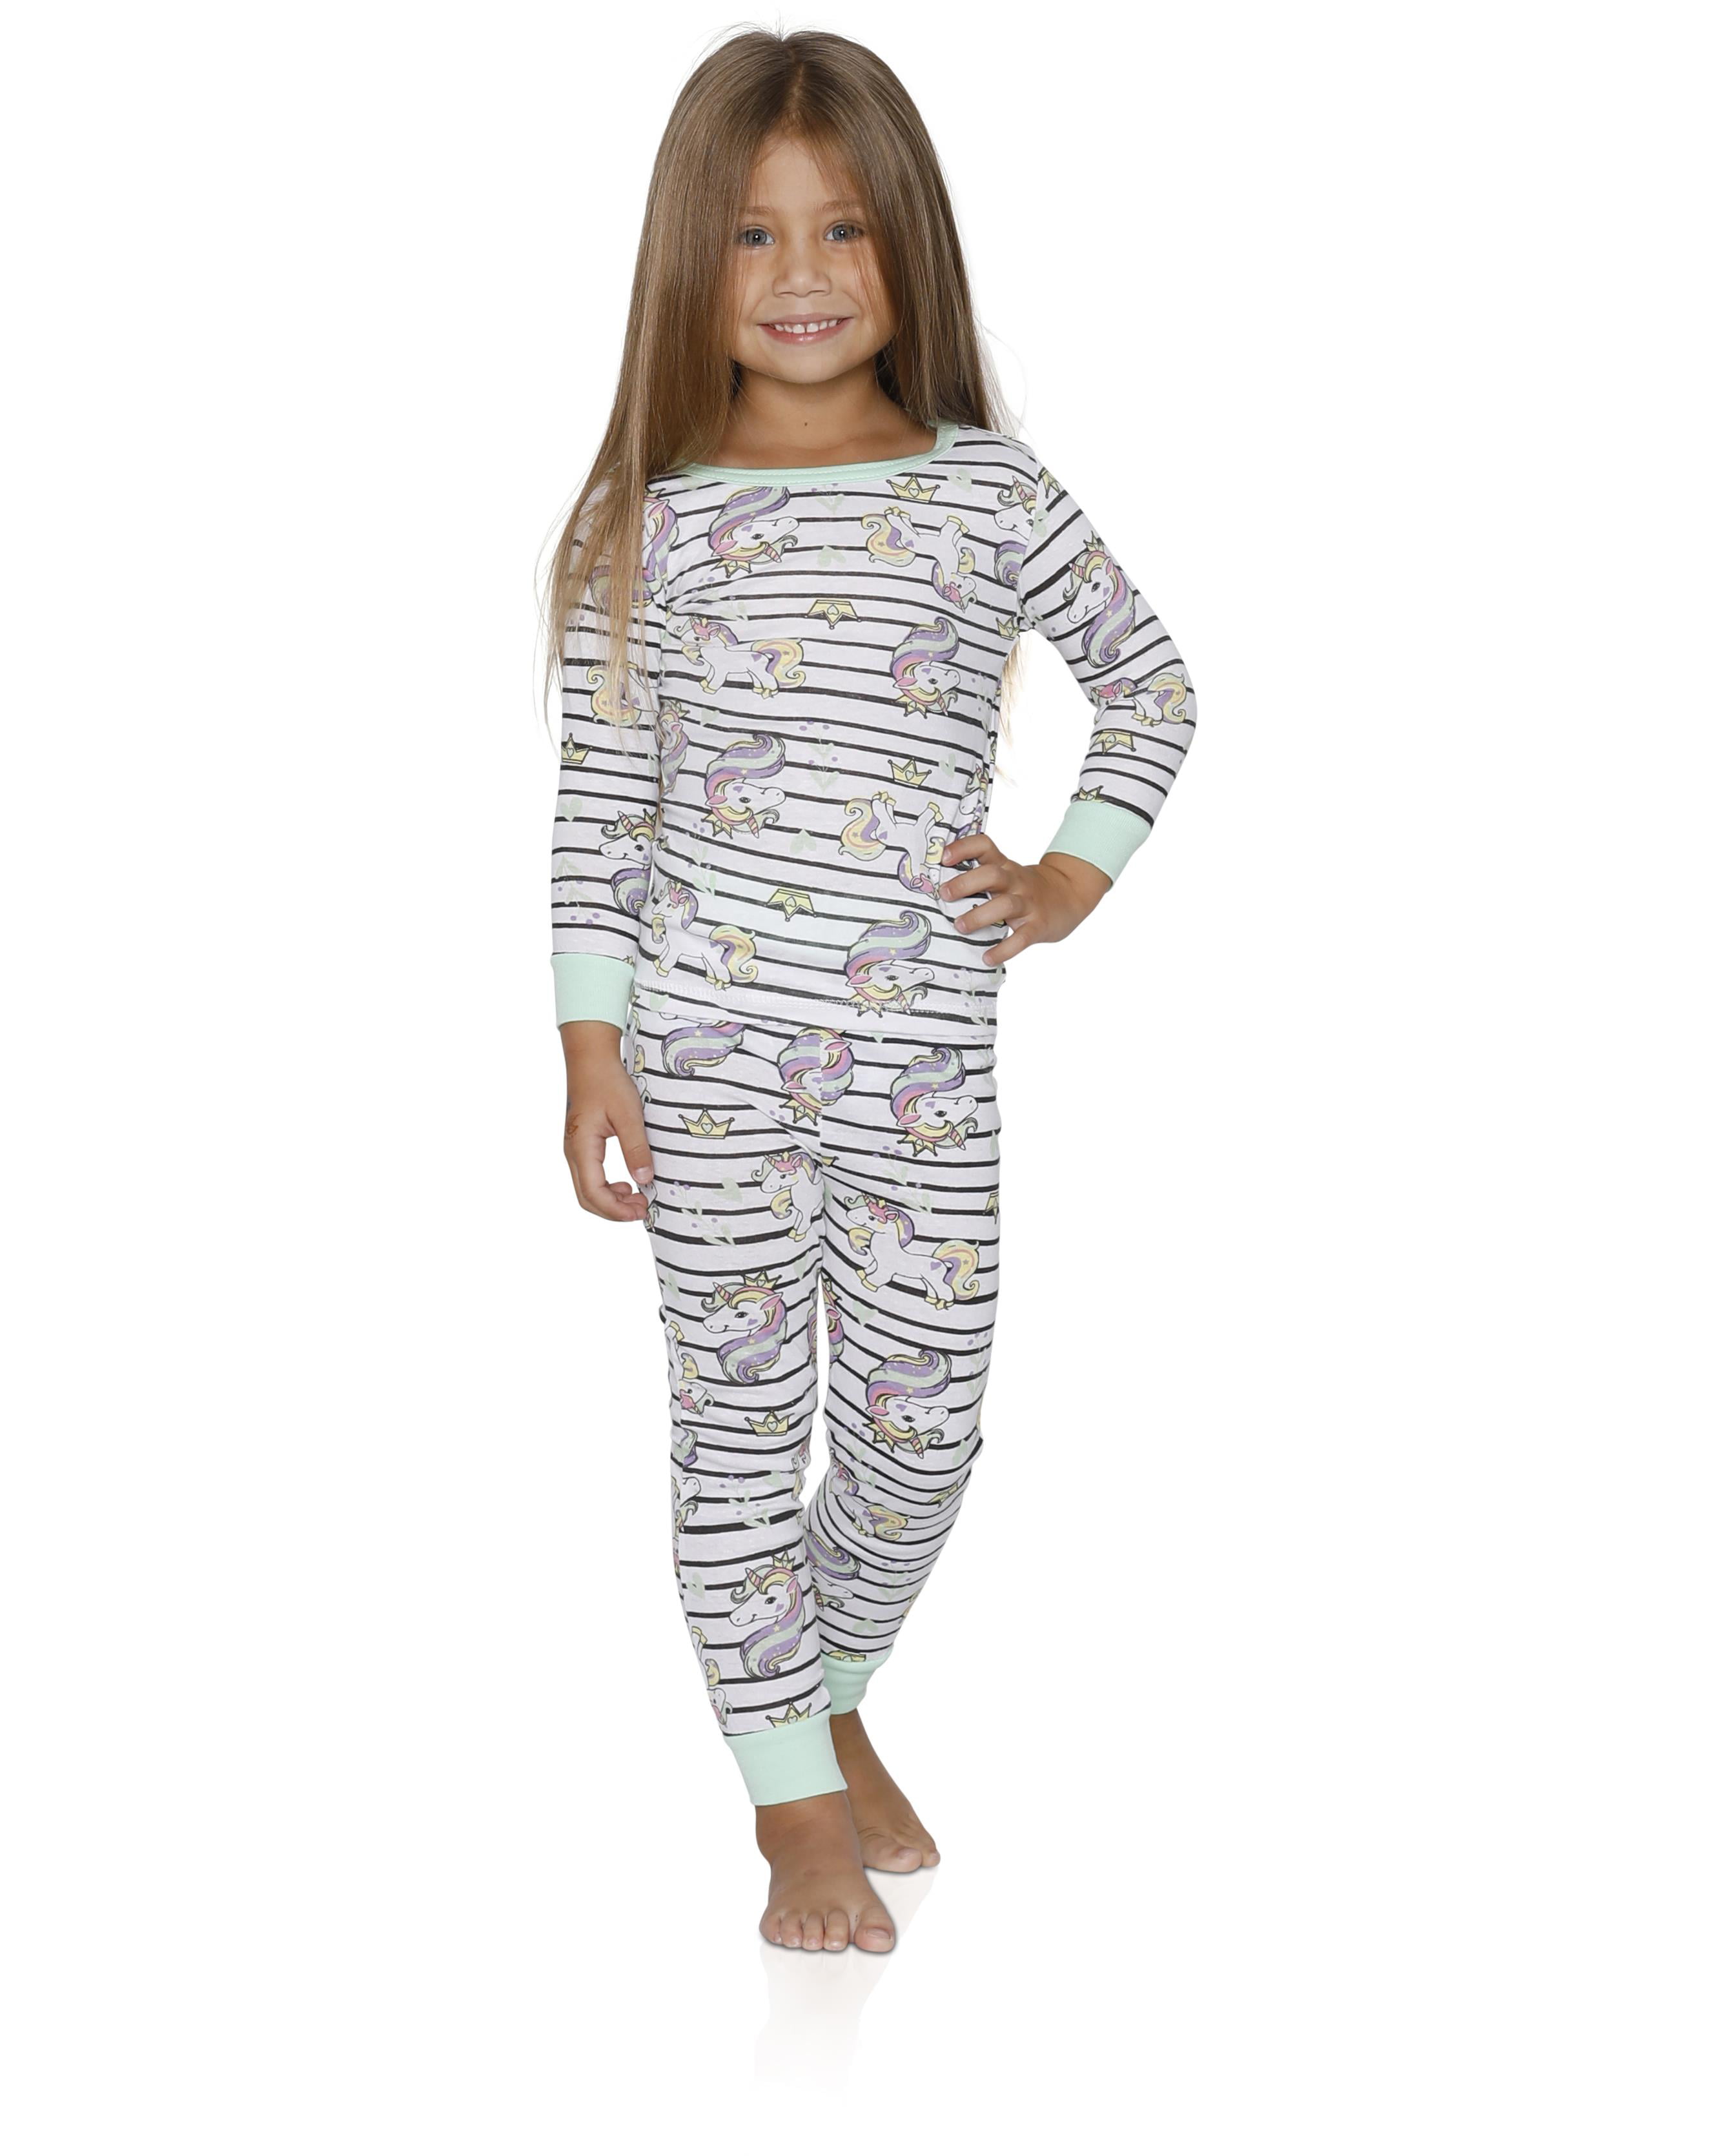 Prestigez - Cozy Couture Girls Pajama 2 Piece Graphic Top and Pants ...